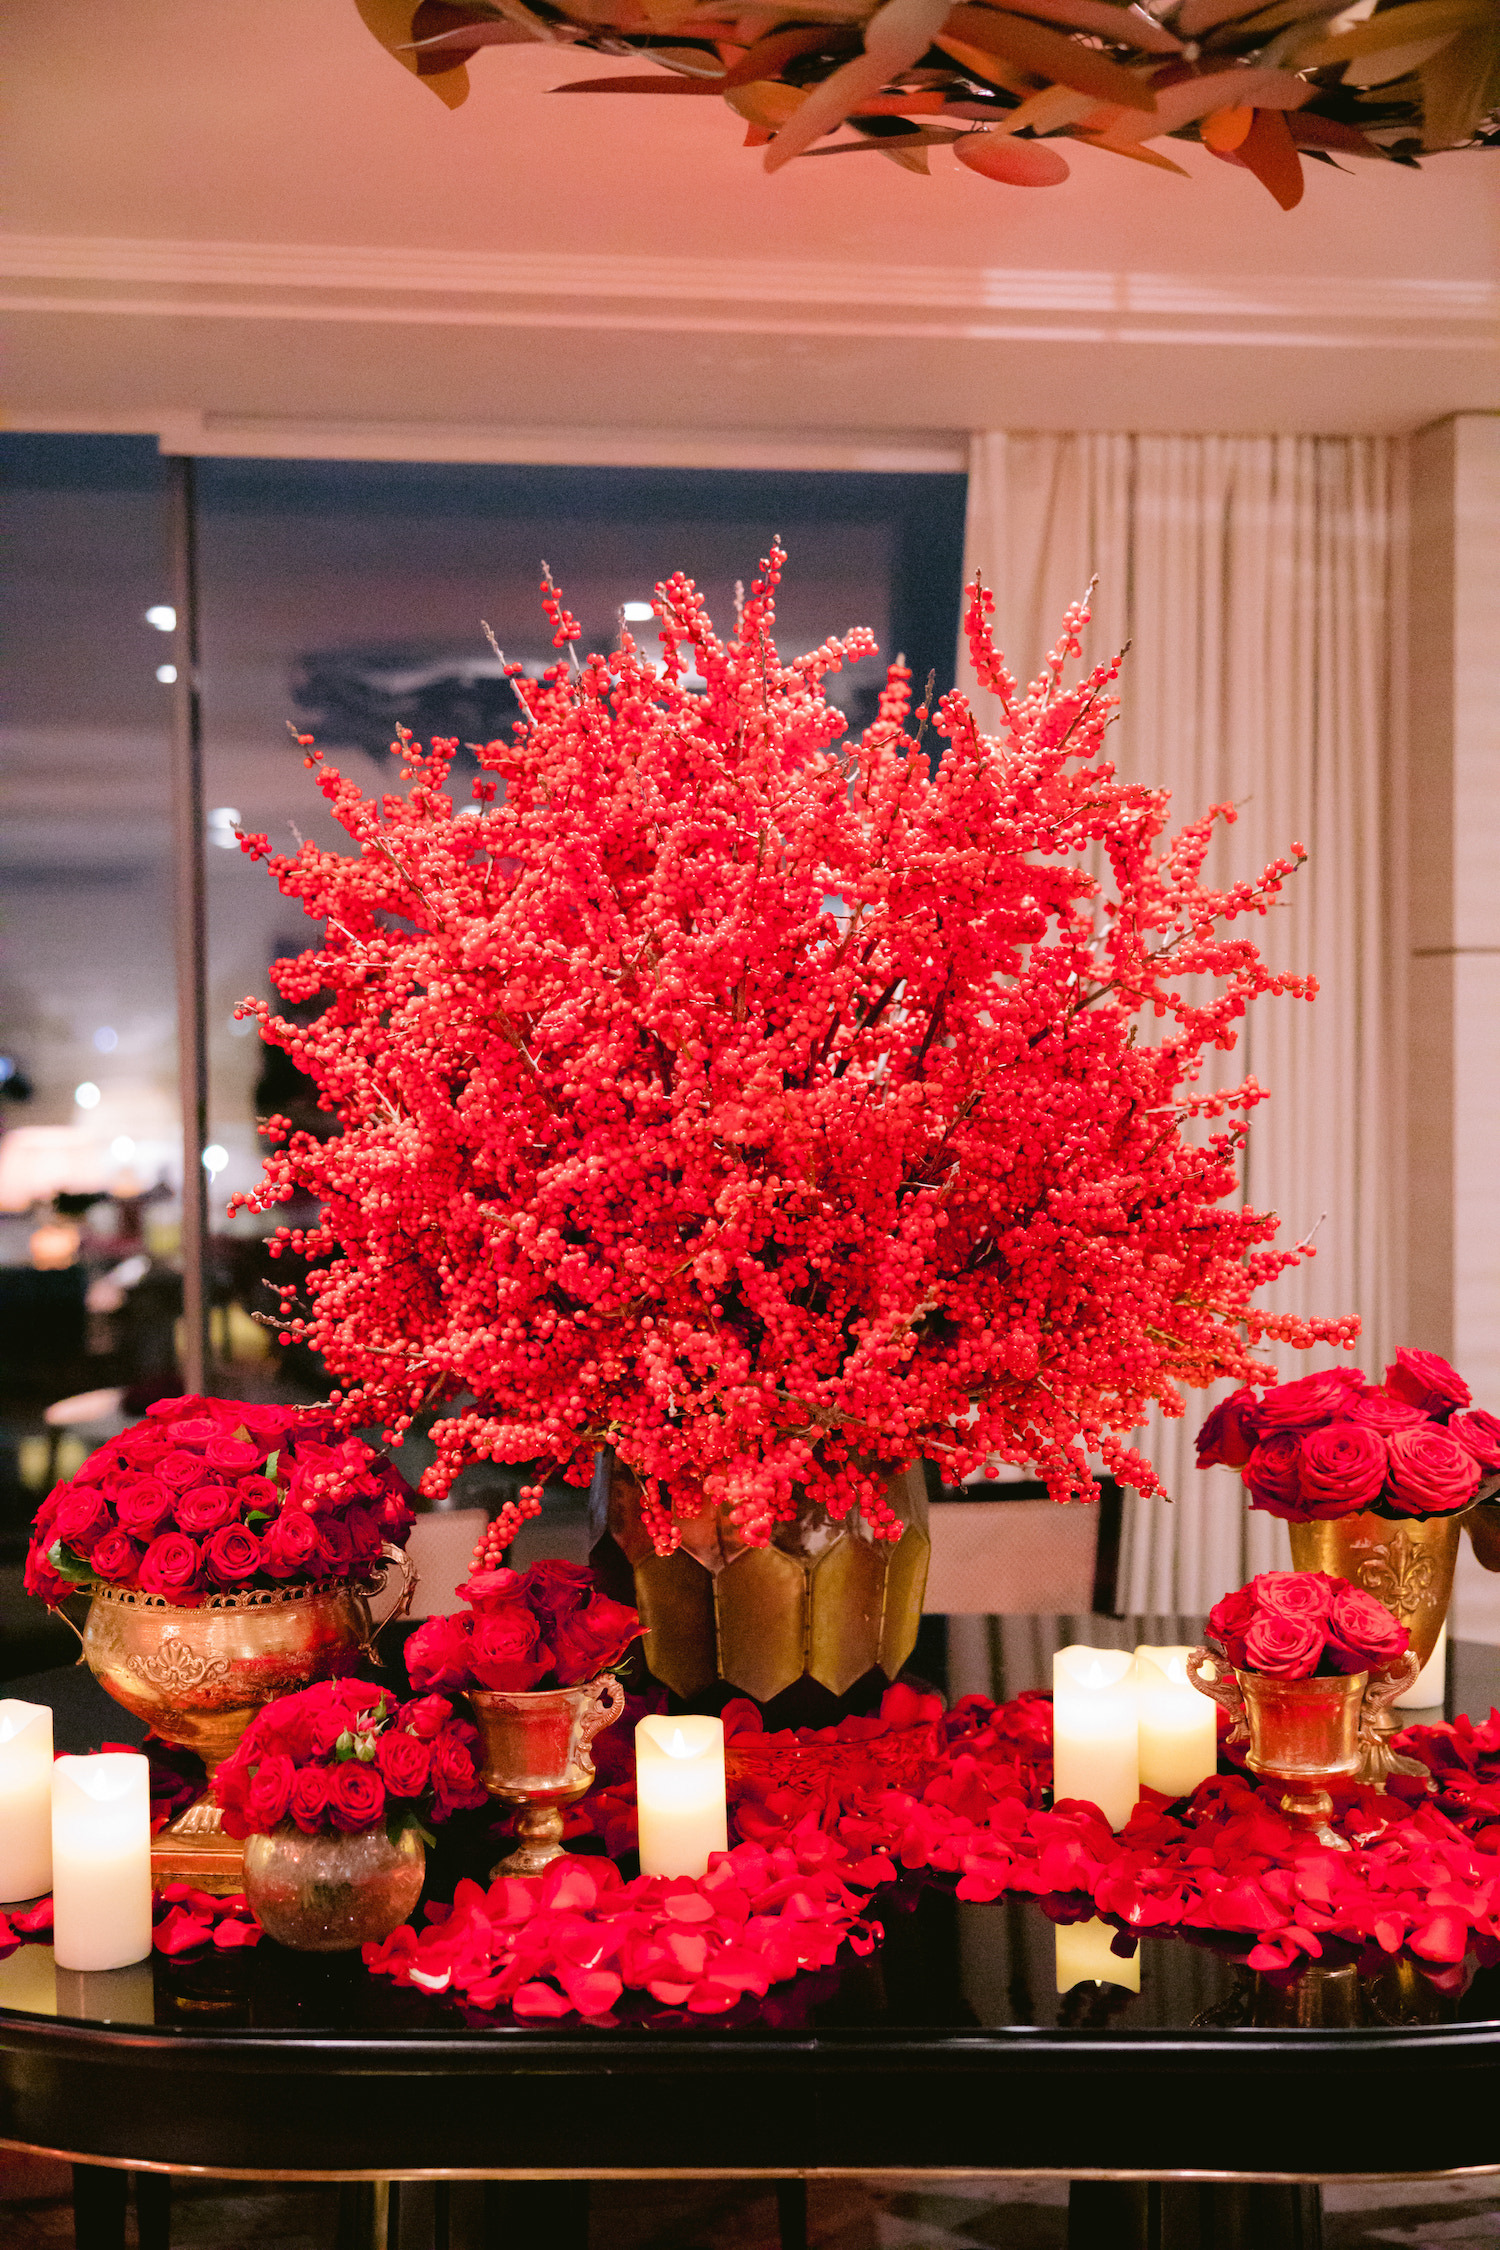 festive red statement floral display